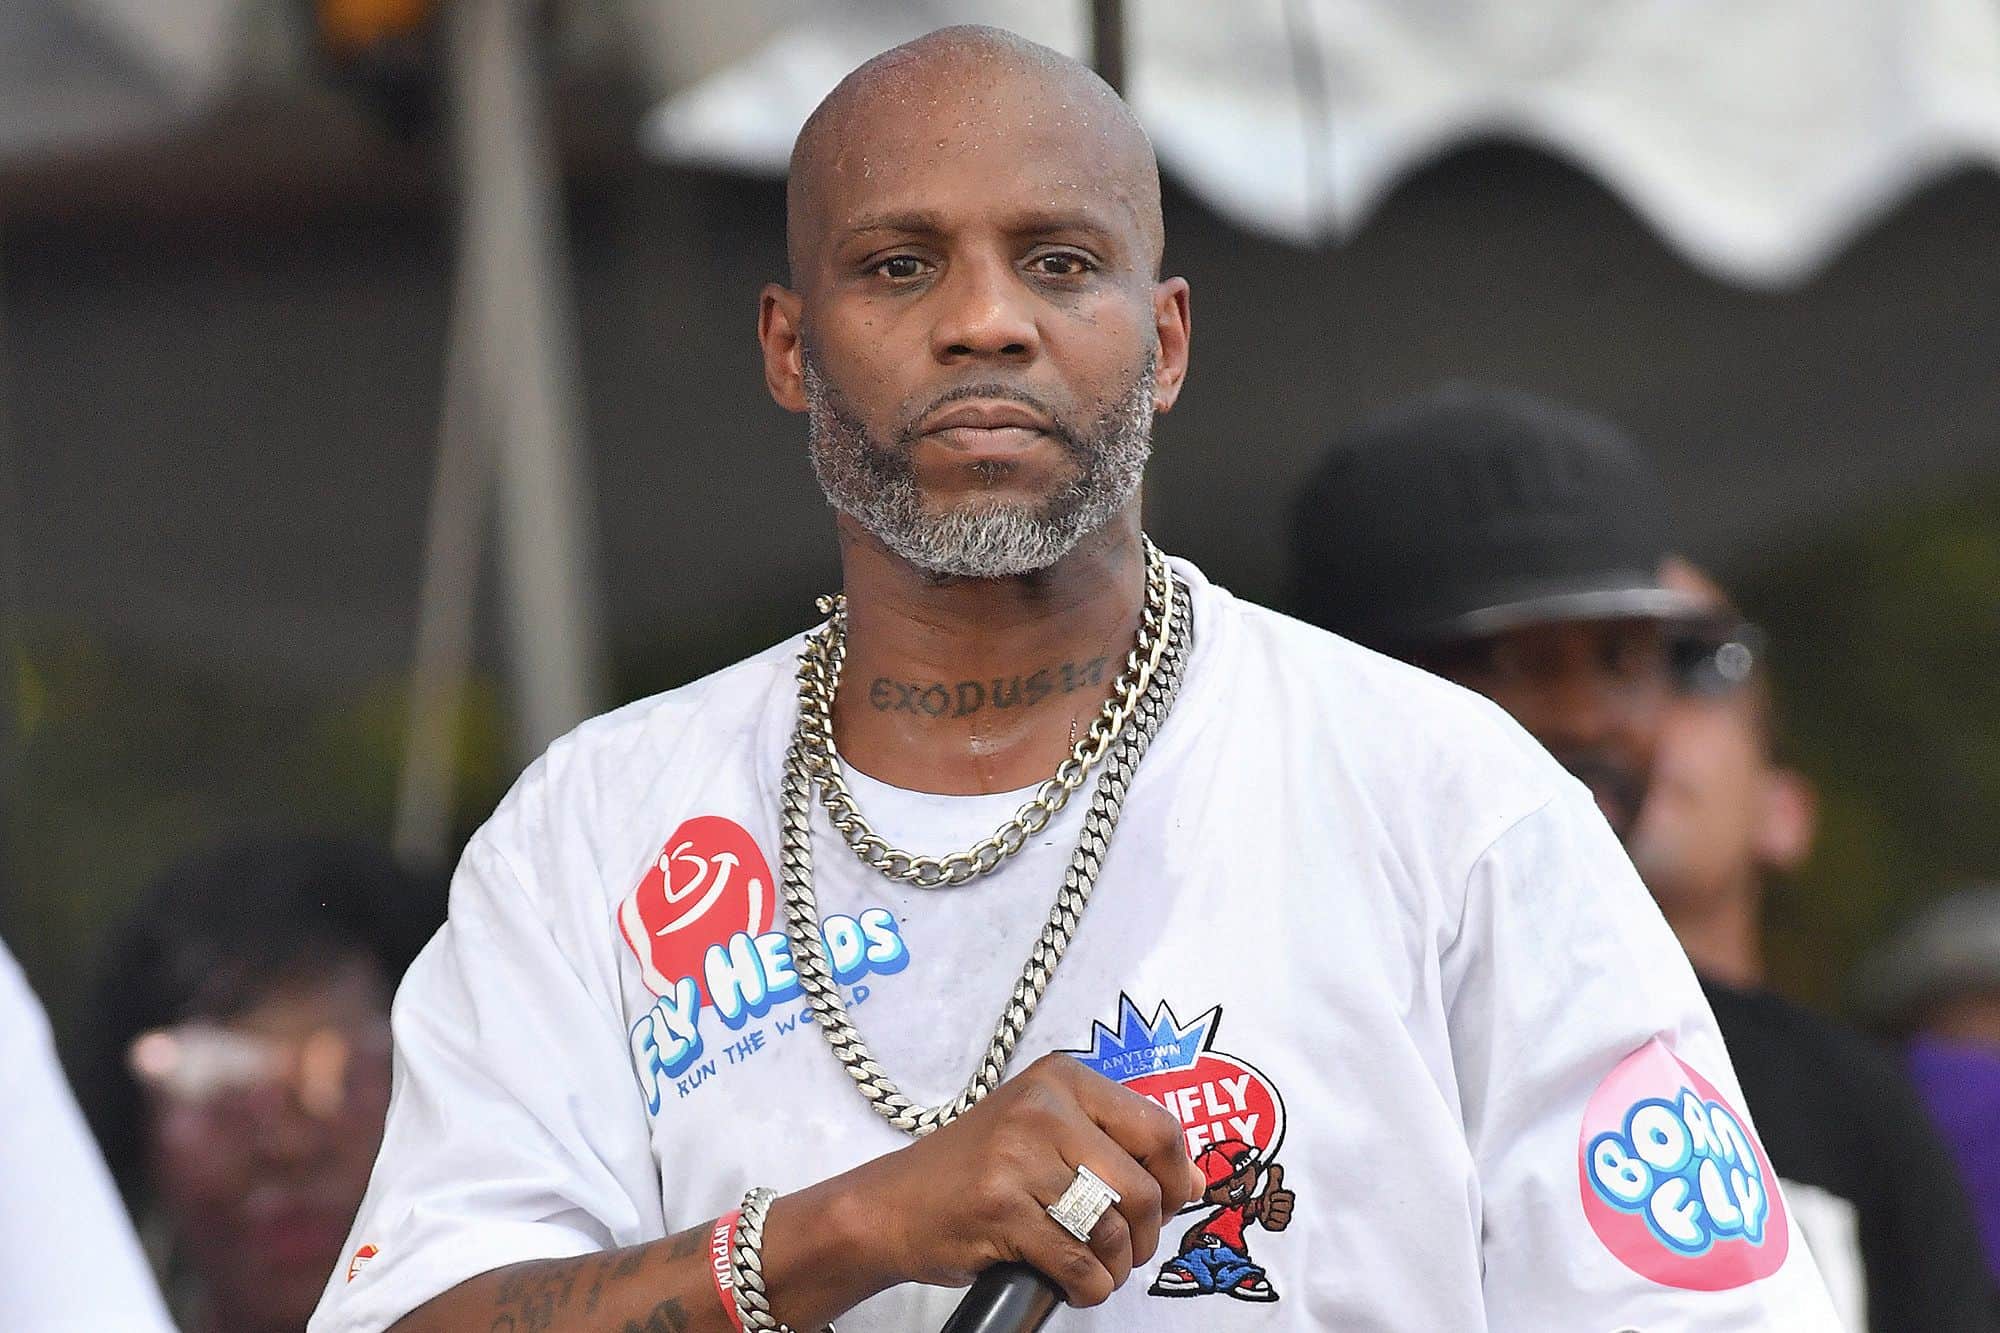 DMX ‘Celebration of Life’ memorial service is now available to watch online